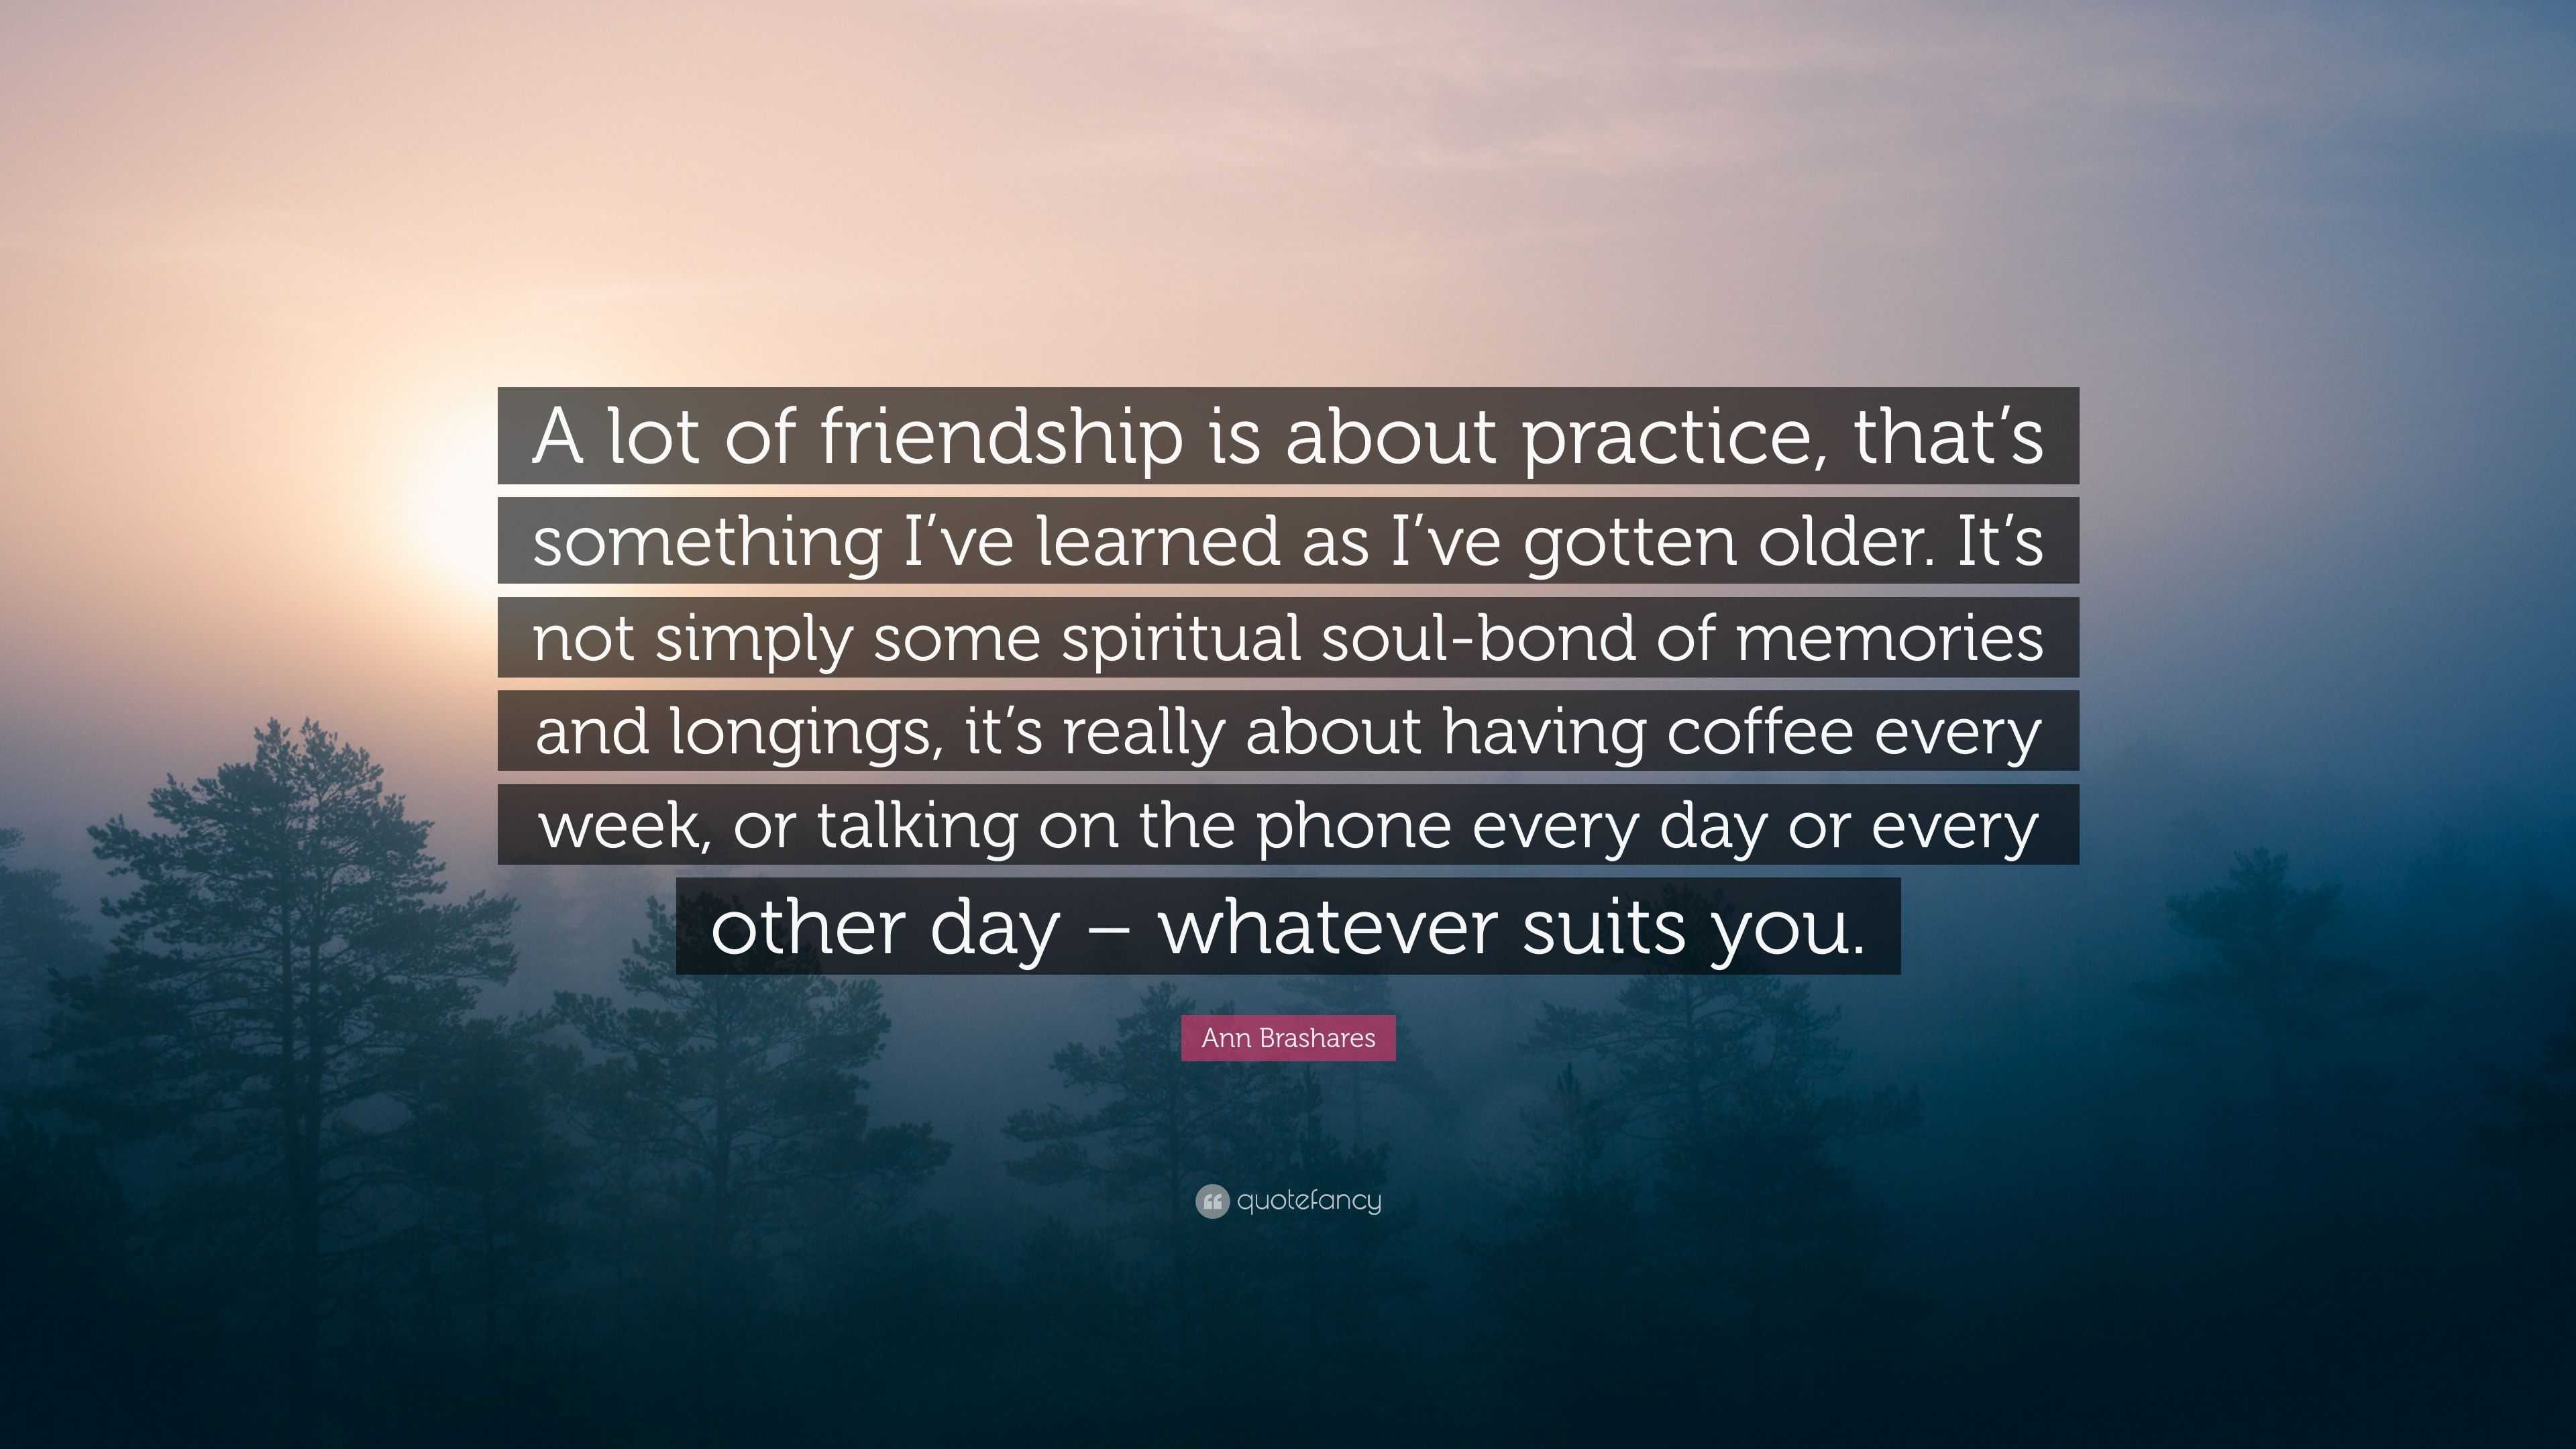 The practice of friendship